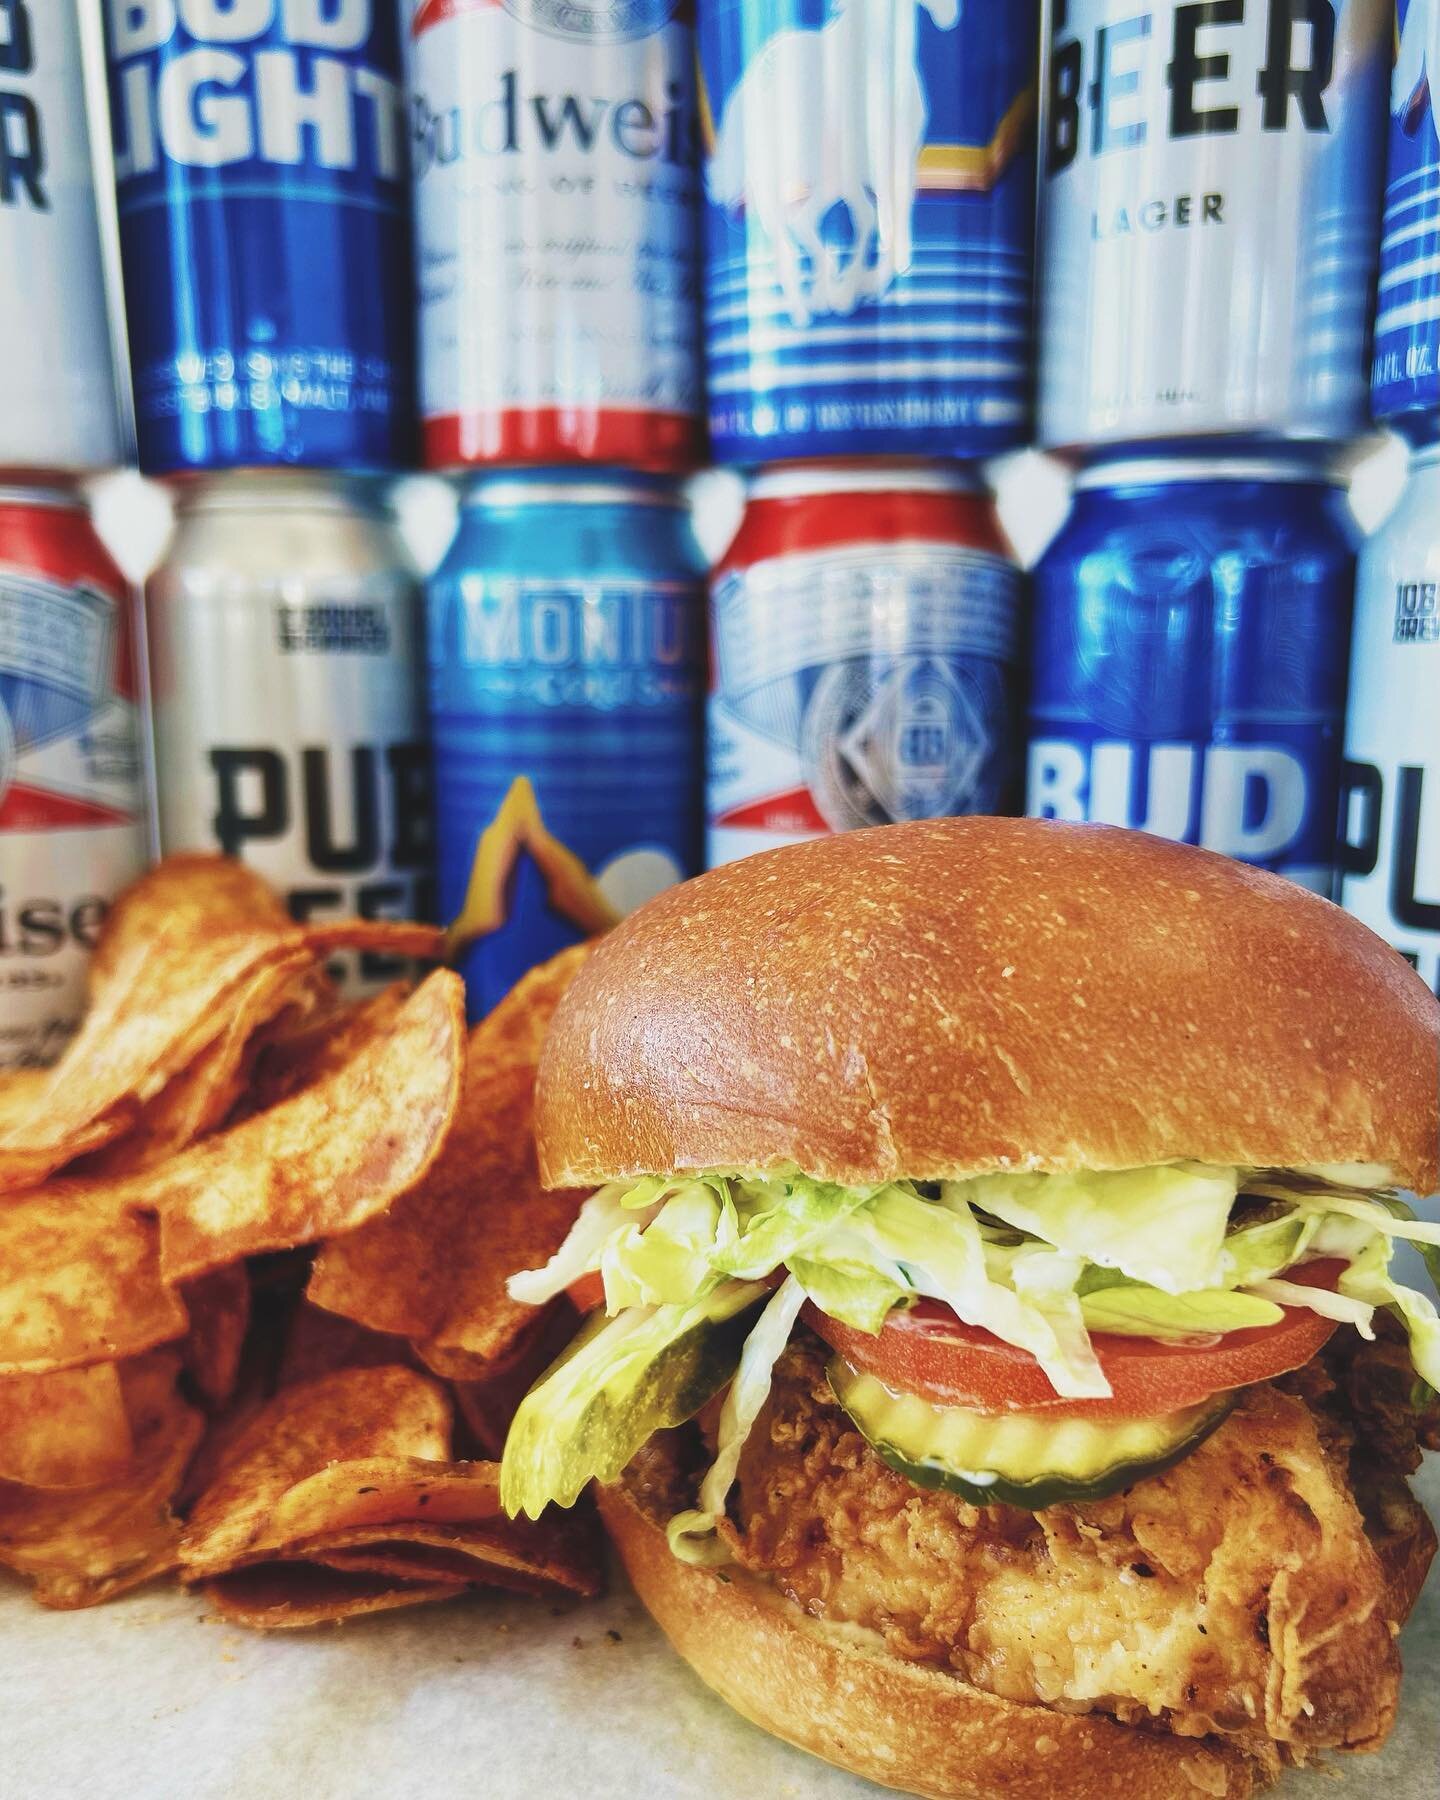 ✨DELISH ALERT✨
It&rsquo;s BACK&hellip;.our &ldquo;Almost Famous Buttermilk Fried Chicken Sandwich&rdquo; has made its way onto the Saturday specials board for the summer!!!
*Buttermilk Brined Fried Chicken
*Homemade Ranch
*Pickles
*Lettuce
*Tomato
*T